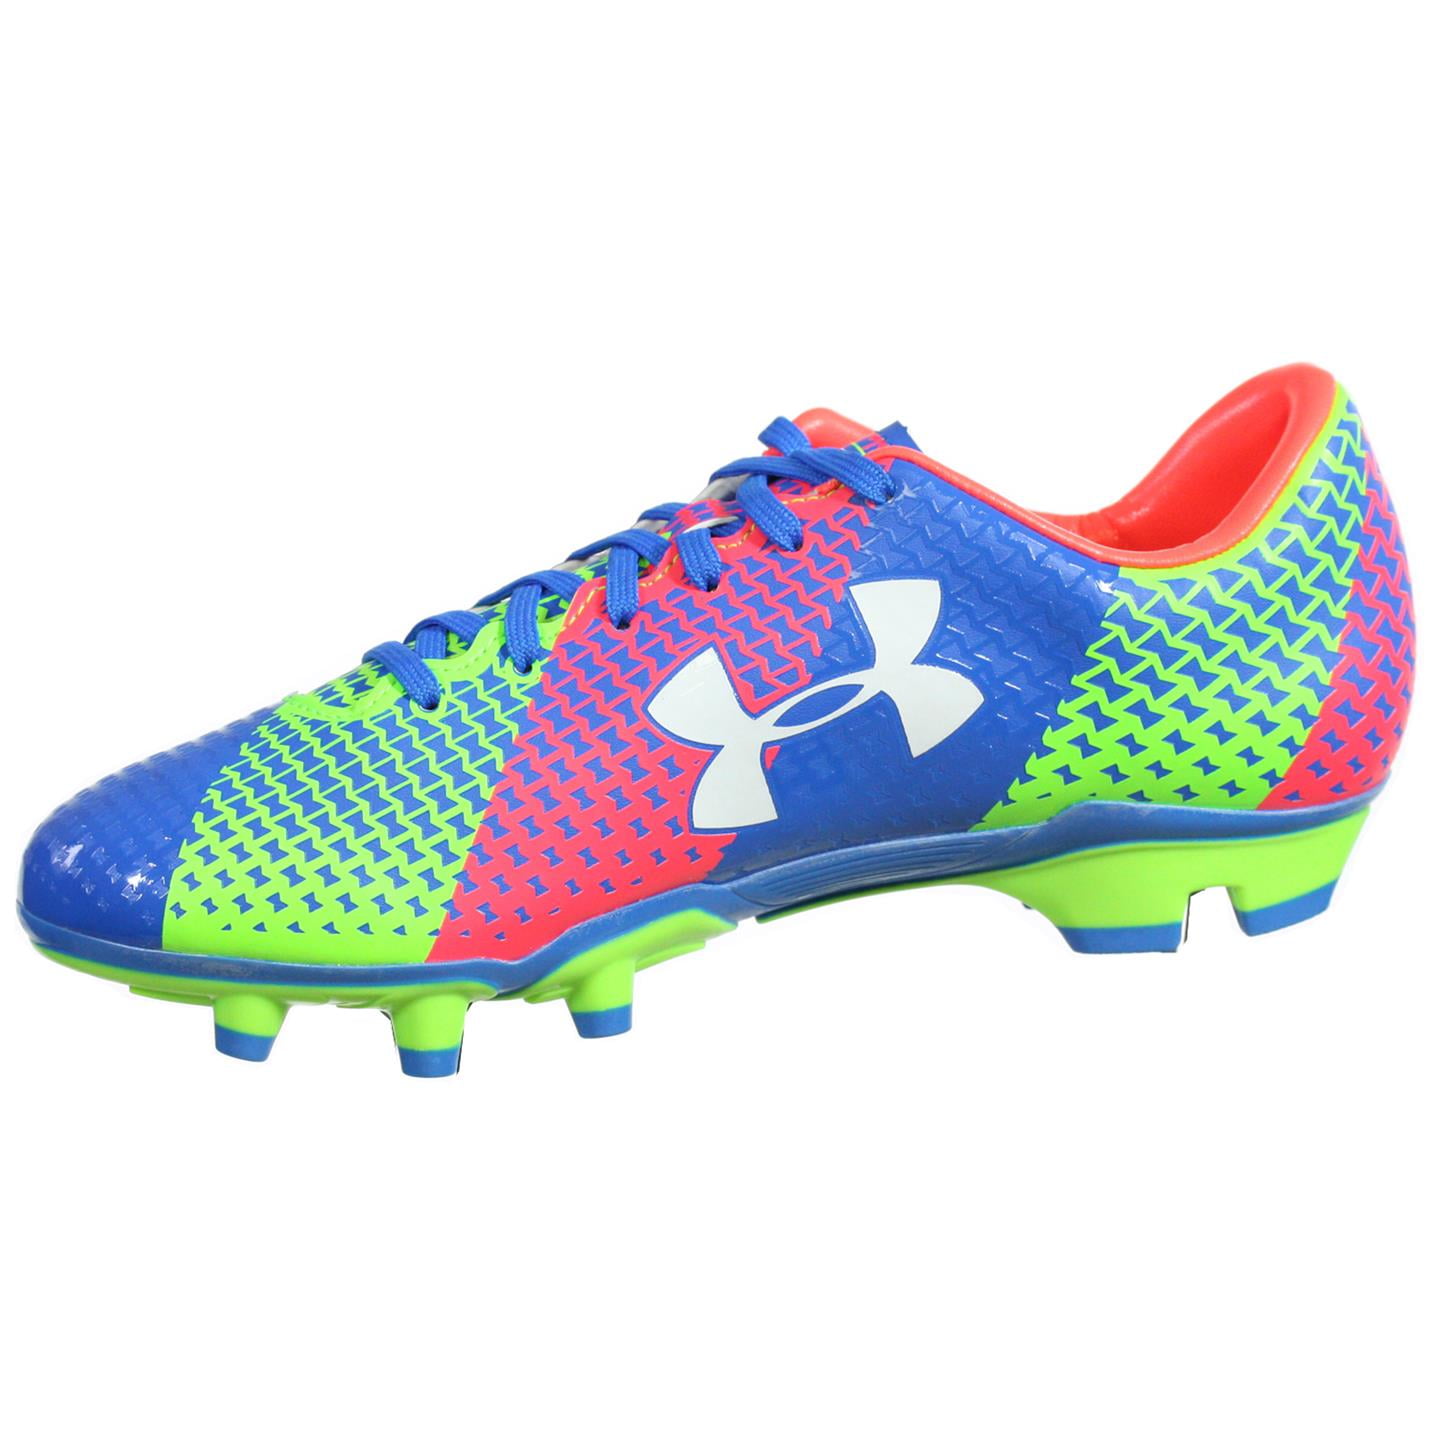 NEW WOMEN'S UNDER ARMOUR CF FORCE 3.0 FG SOCCER CLEATS & SPIKES FOOTBALL BOOTS 